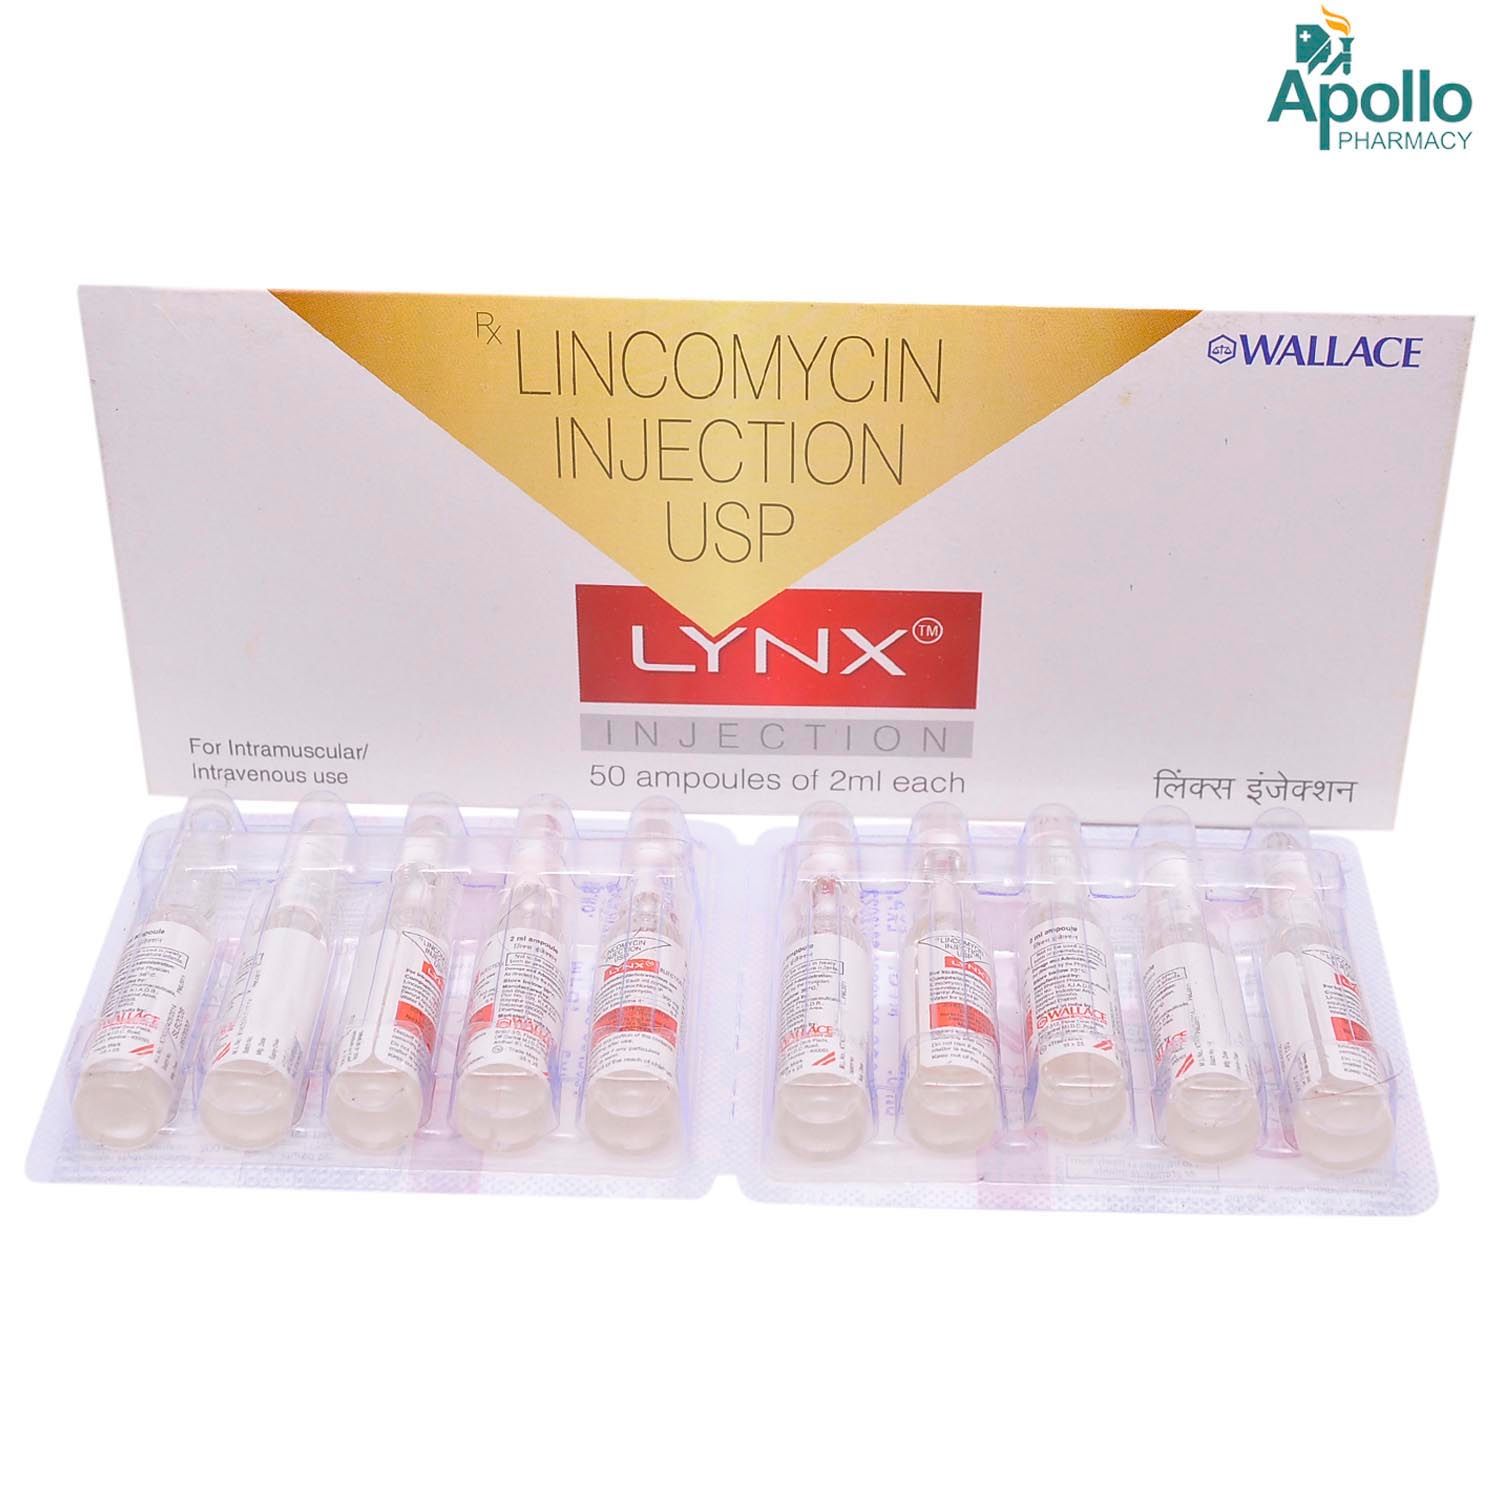 Lynx 300 Injection 2 ml Price, Uses, Side Effects, Composition Apollo